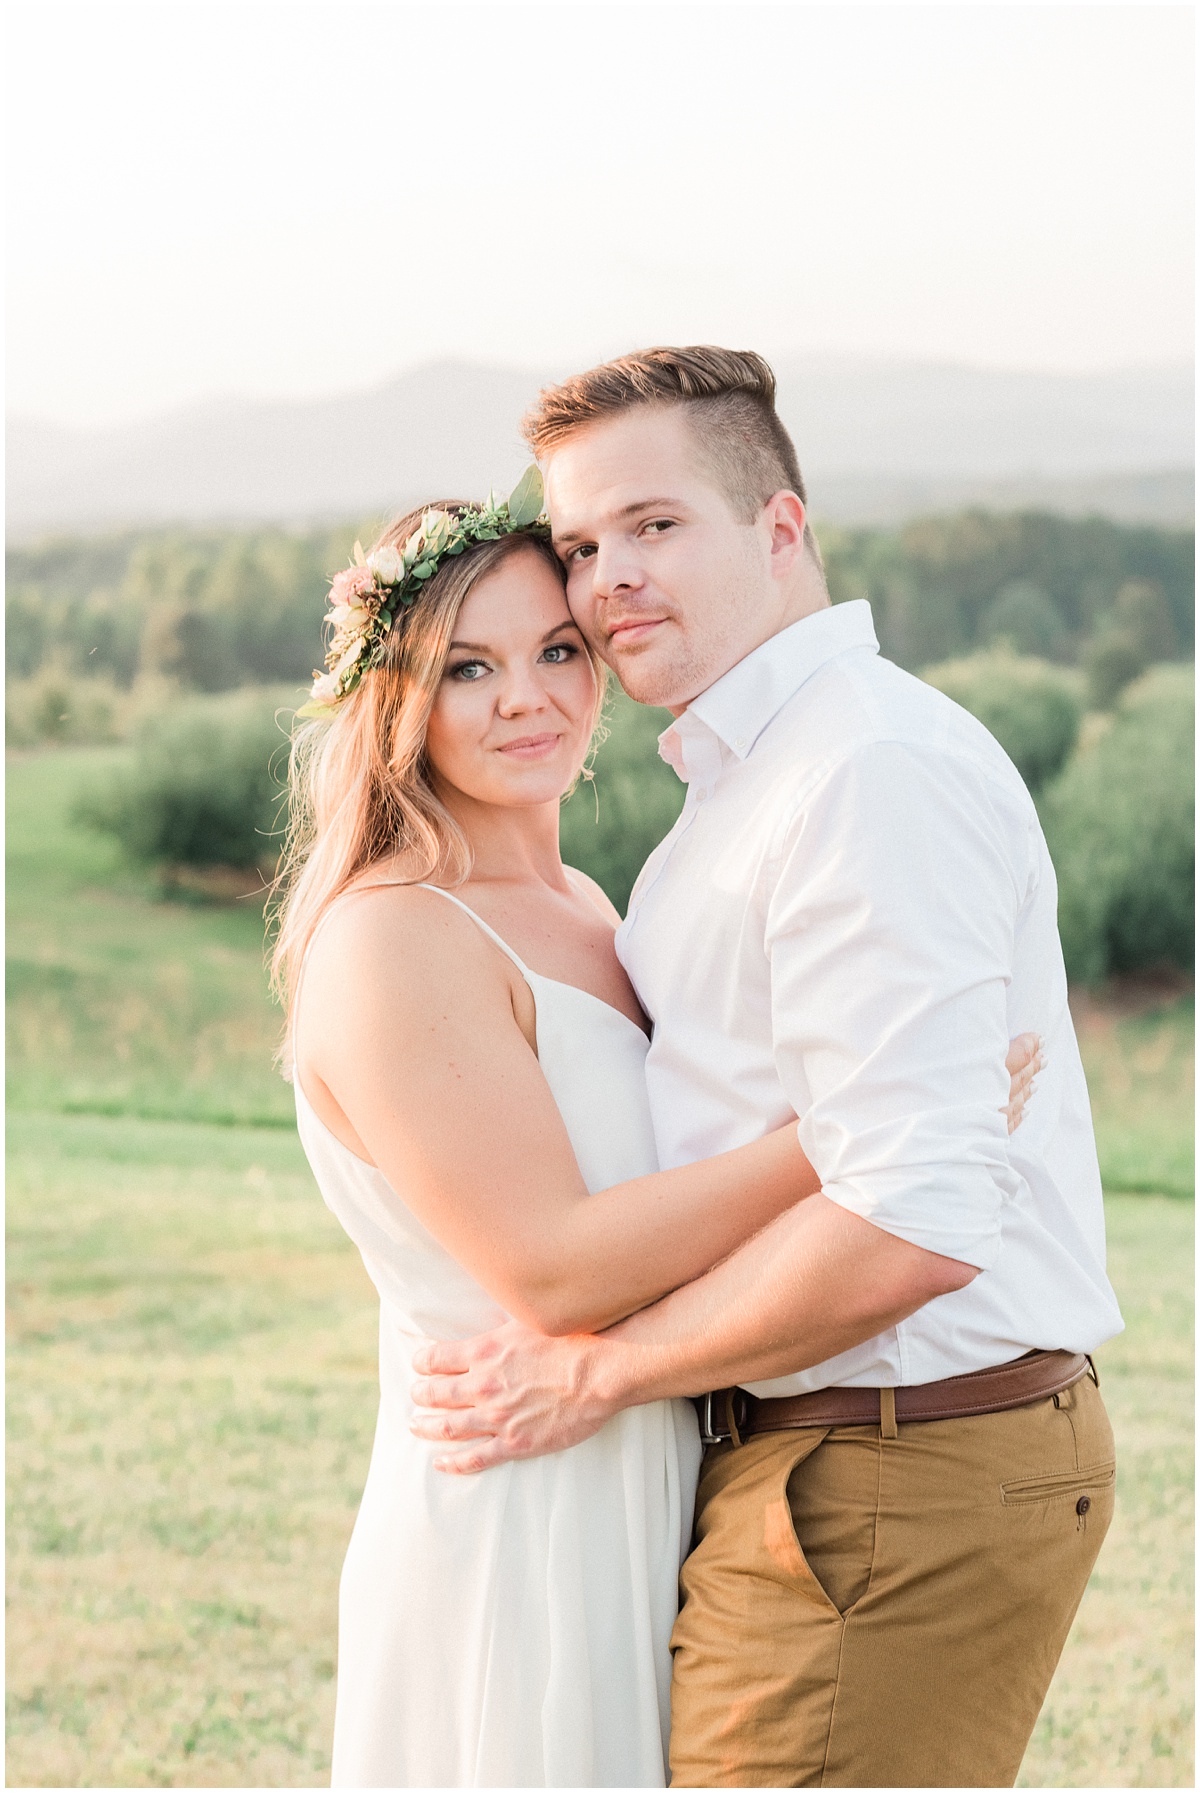 Engagement photos with flower crown